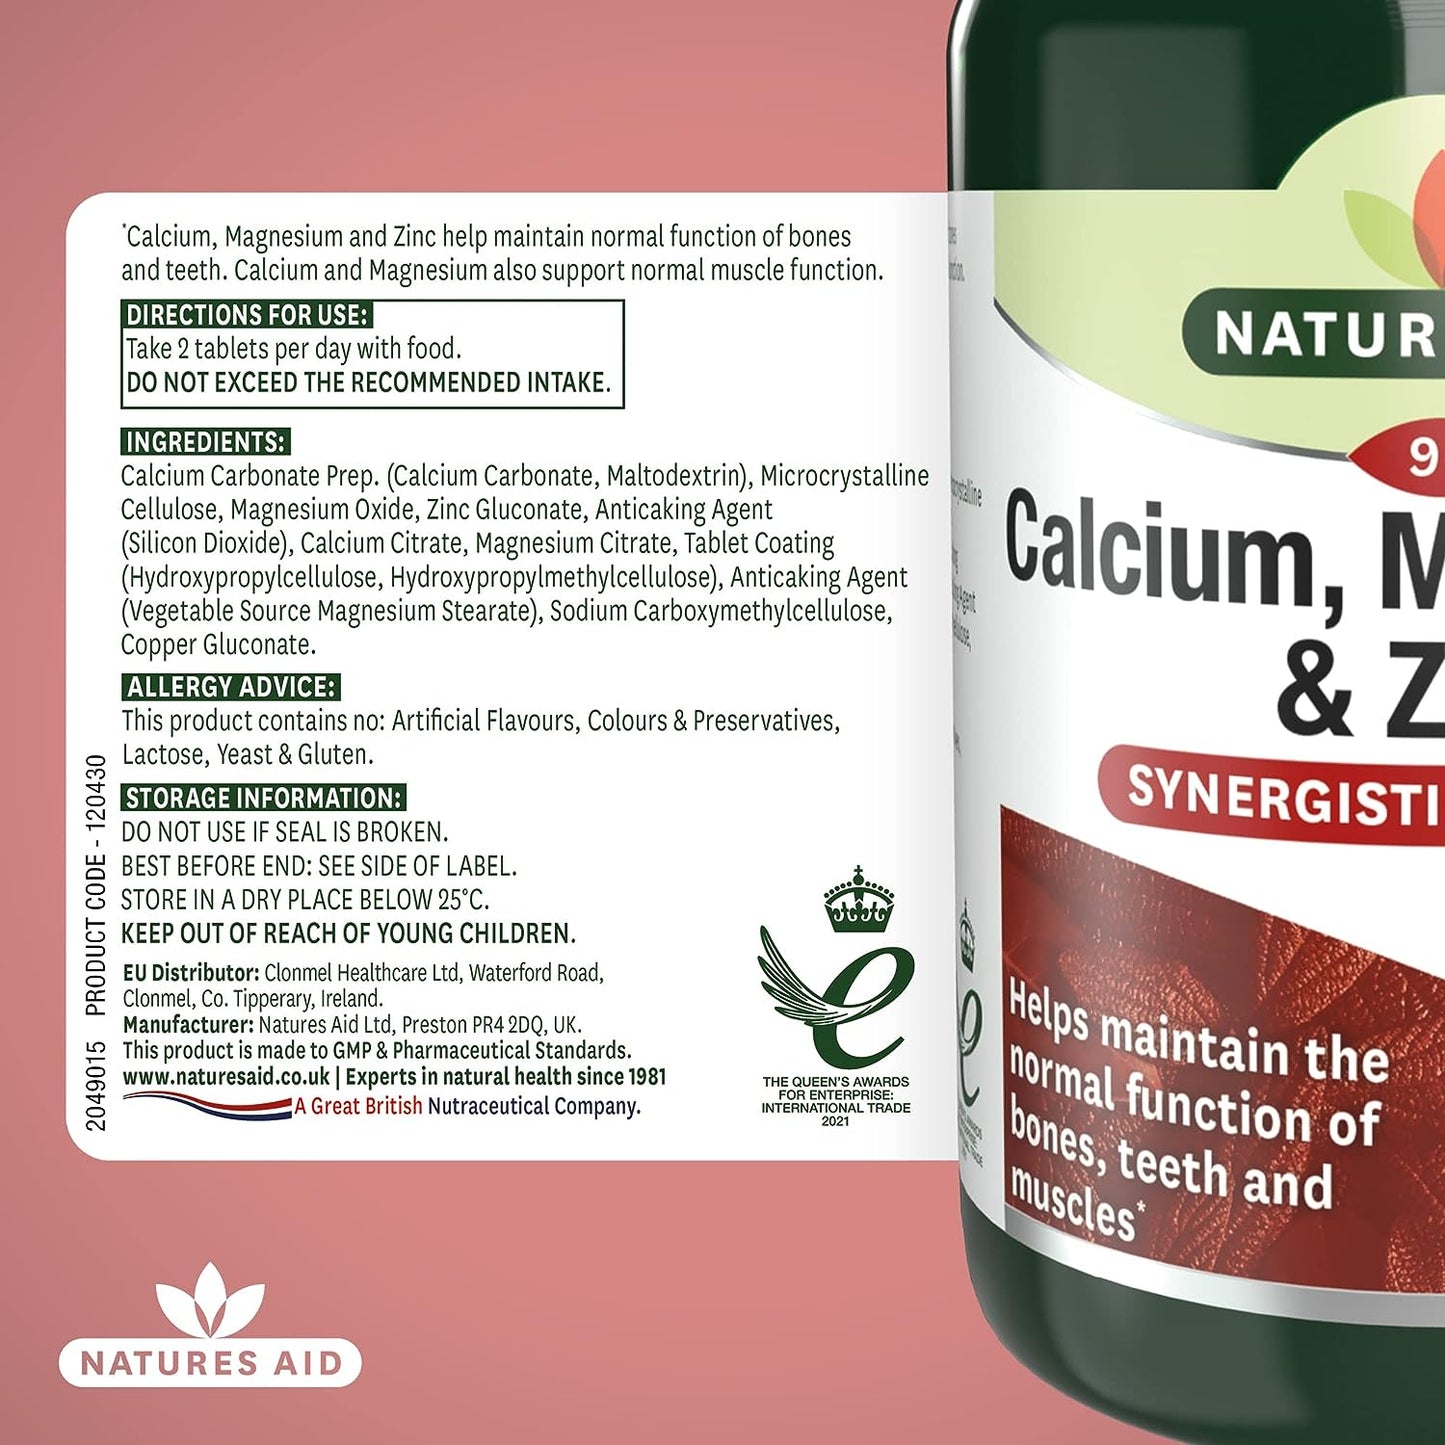 Natures Aid Calcium, Magnesium and Zinc, Maintain Normal Bones, Teeth and Muscle Function, Vegan, 90 Tablets